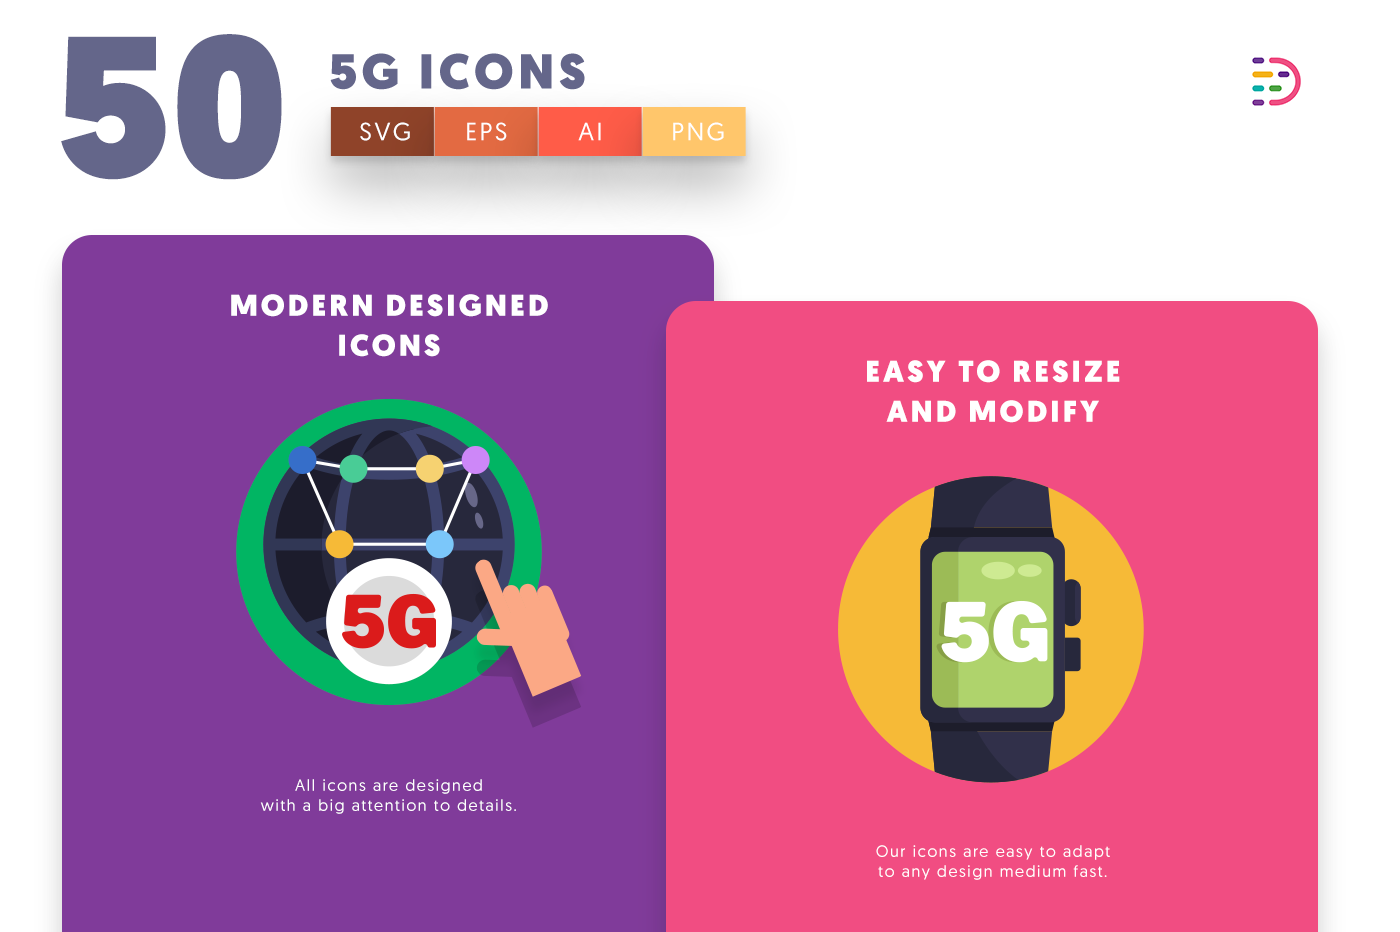 5G icons png/svg/eps